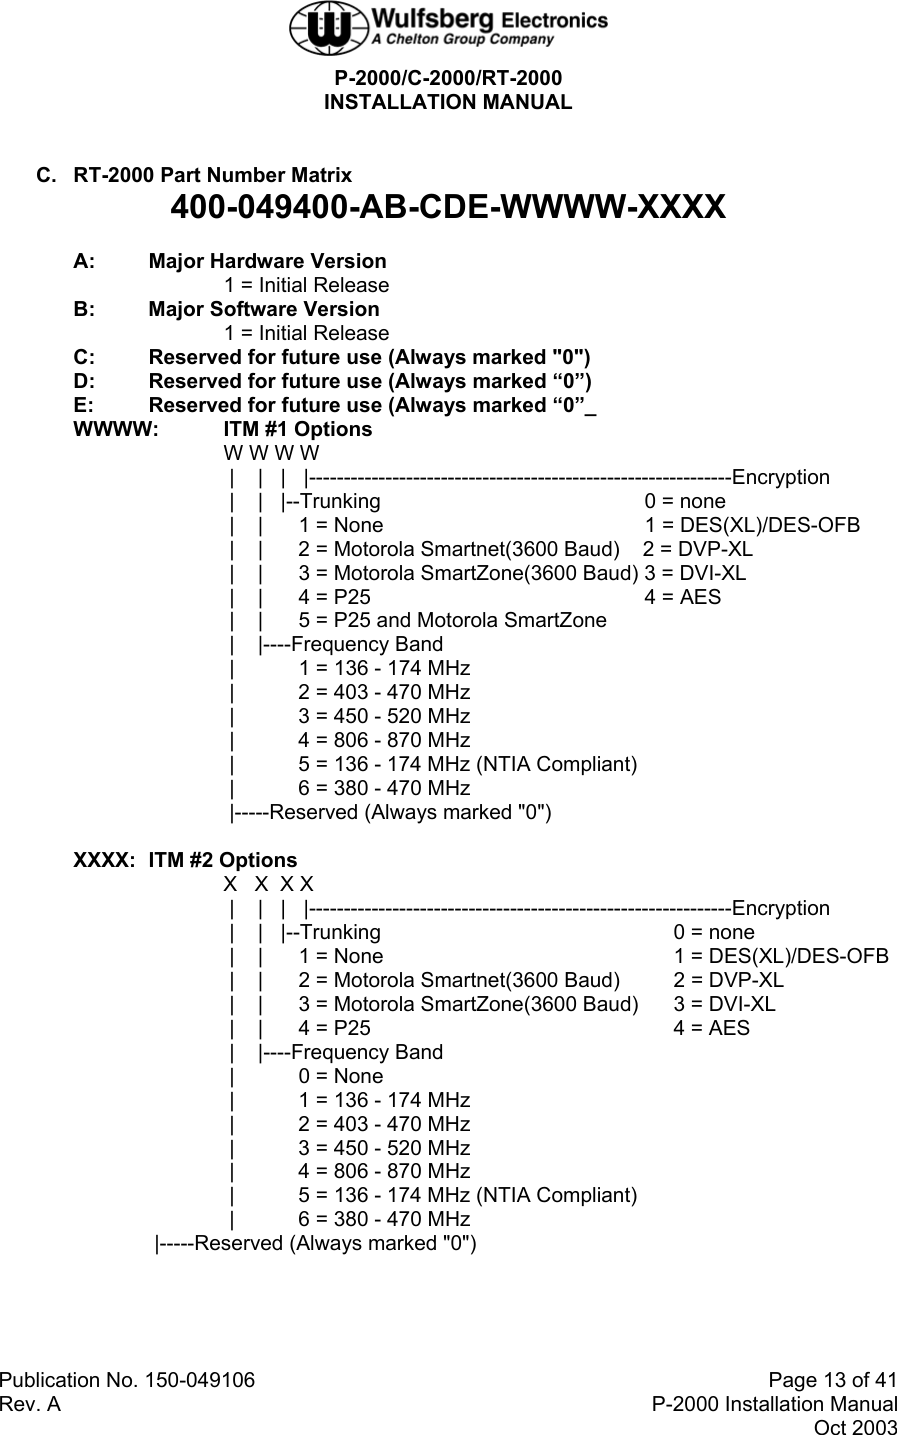  P-2000/C-2000/RT-2000 INSTALLATION MANUAL  Publication No. 150-049106  Page 13 of 41 Rev. A  P-2000 Installation Manual Oct 2003  C.  RT-2000 Part Number Matrix 400-049400-AB-CDE-WWWW-XXXX   A:  Major Hardware Version       1 = Initial Release   B:   Major Software Version    1 = Initial Release  C:  Reserved for future use (Always marked &quot;0&quot;)  D:  Reserved for future use (Always marked “0”)  E:  Reserved for future use (Always marked “0”_  WWWW:  ITM #1 Options    W W W W         |    |   |   |-------------------------------------------------------------Encryption        |    |   |--Trunking              0 = none        |    |  1 = None              1 = DES(XL)/DES-OFB        |    |  2 = Motorola Smartnet(3600 Baud)    2 = DVP-XL        |    |  3 = Motorola SmartZone(3600 Baud) 3 = DVI-XL        |    |  4 = P25               4 = AES        |    |  5 = P25 and Motorola SmartZone  |    |----Frequency Band        |   1 = 136 - 174 MHz         |  2 = 403 - 470 MHz        |  3 = 450 - 520 MHz        |  4 = 806 - 870 MHz        |  5 = 136 - 174 MHz (NTIA Compliant)        |  6 = 380 - 470 MHz        |-----Reserved (Always marked &quot;0&quot;)             XXXX:  ITM #2 Options X   X  X X         |    |   |   |-------------------------------------------------------------Encryption        |    |   |--Trunking        0 = none        |    |  1 = None        1 = DES(XL)/DES-OFB        |    |  2 = Motorola Smartnet(3600 Baud)  2 = DVP-XL        |    |  3 = Motorola SmartZone(3600 Baud)  3 = DVI-XL        |    |  4 = P25         4 = AES        |    |----Frequency Band     |  0 = None  |  1 = 136 - 174 MHz         |  2 = 403 - 470 MHz        |  3 = 450 - 520 MHz        |  4 = 806 - 870 MHz        |  5 = 136 - 174 MHz (NTIA Compliant)        |  6 = 380 - 470 MHz      |-----Reserved (Always marked &quot;0&quot;) 